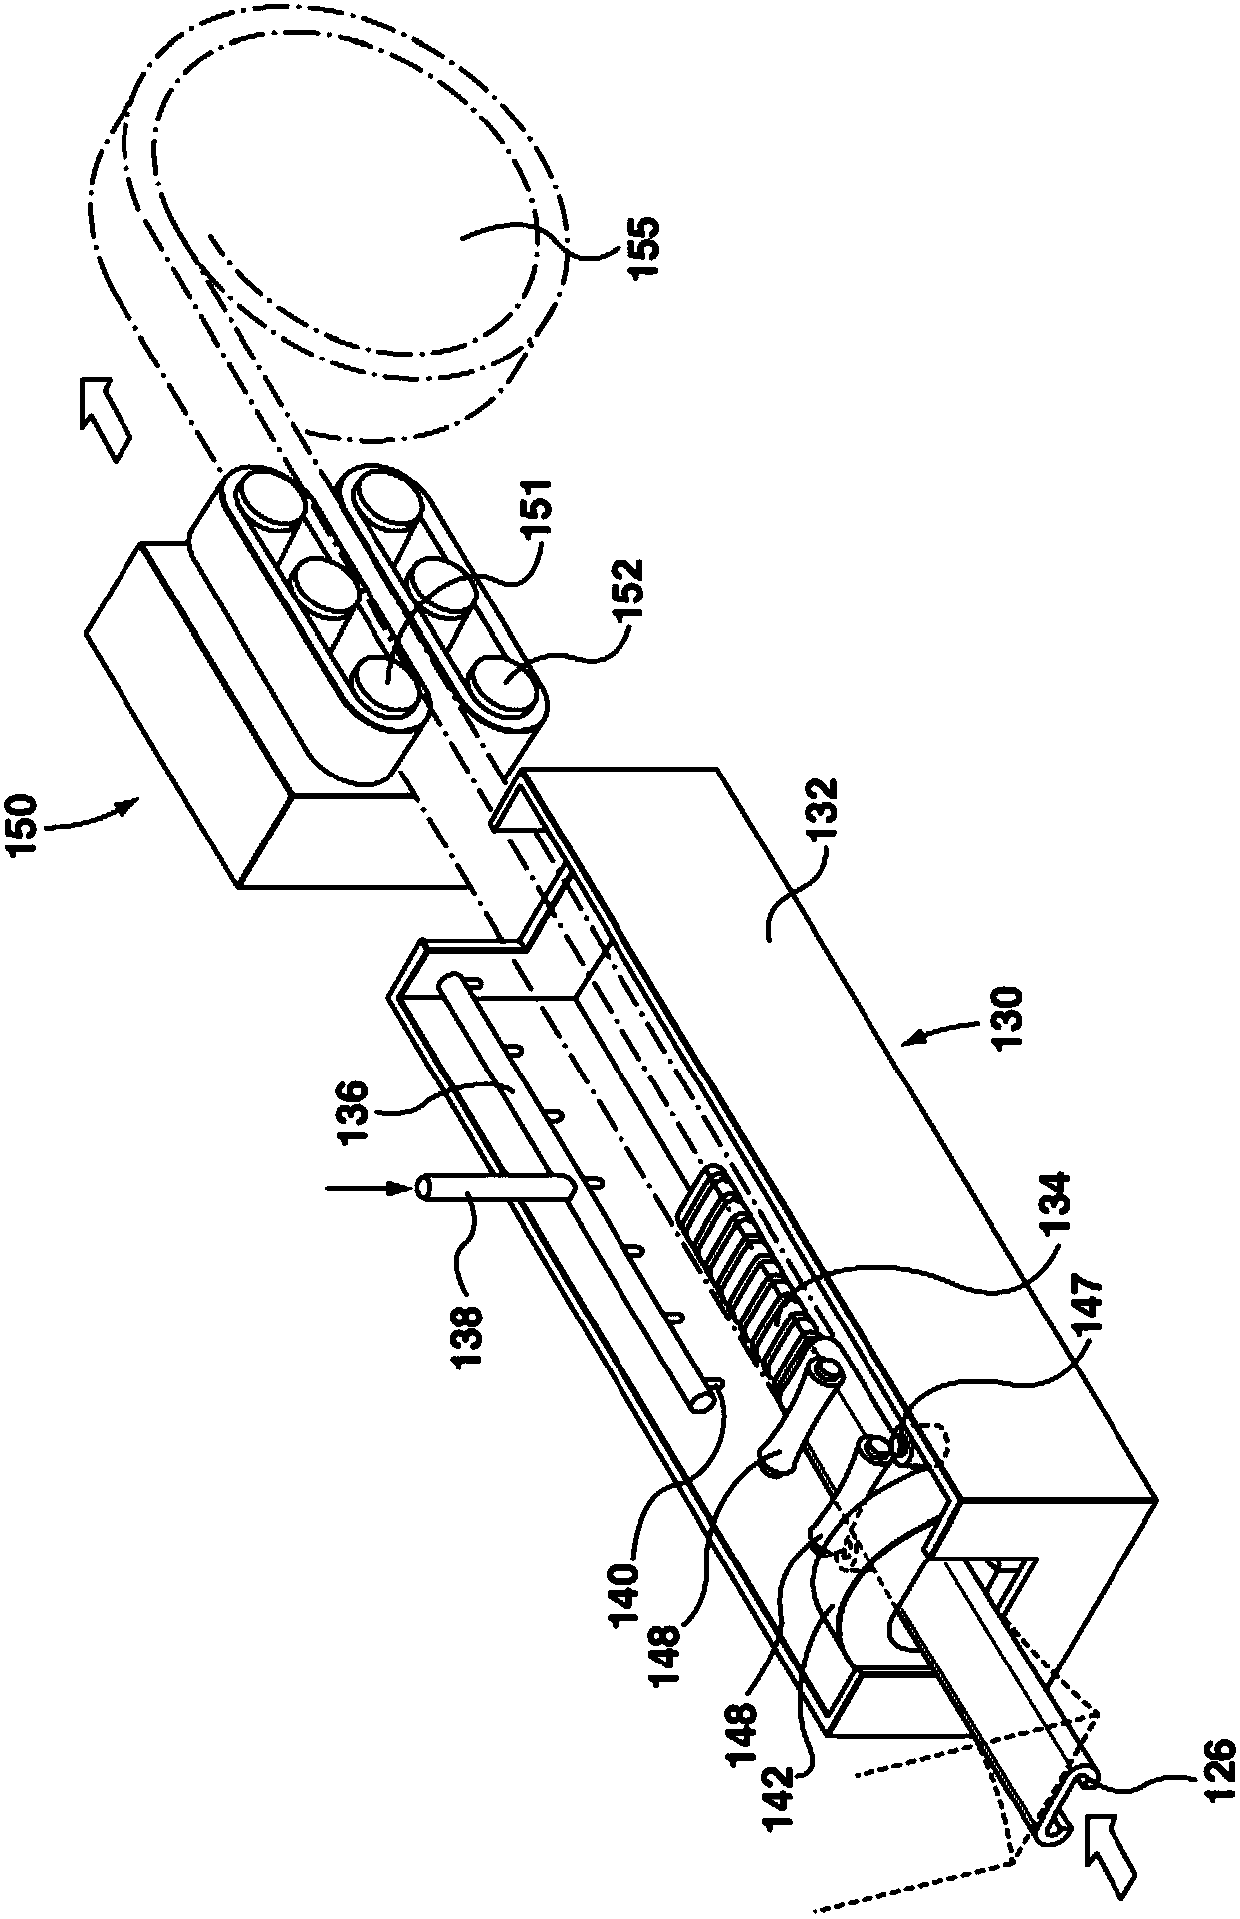 Method And Apparatus For Extrusion Of Thermoplastic Handrail